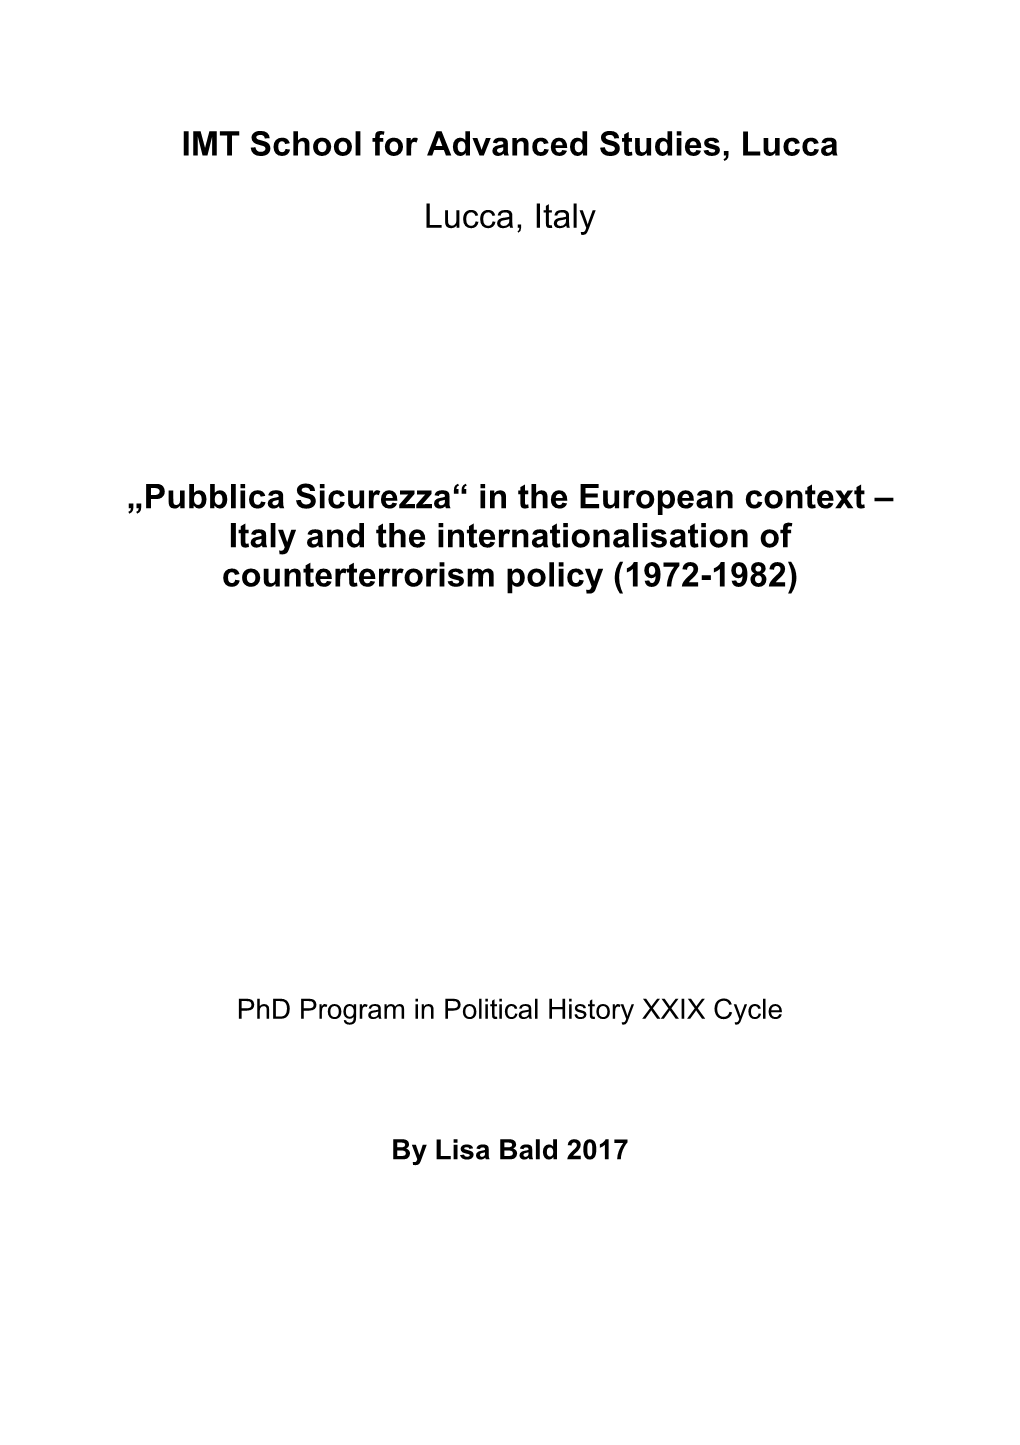 „Pubblica Sicurezza“ in the European Context – Italy and the Internationalisation of Counterterrorism Policy (1972-1982)